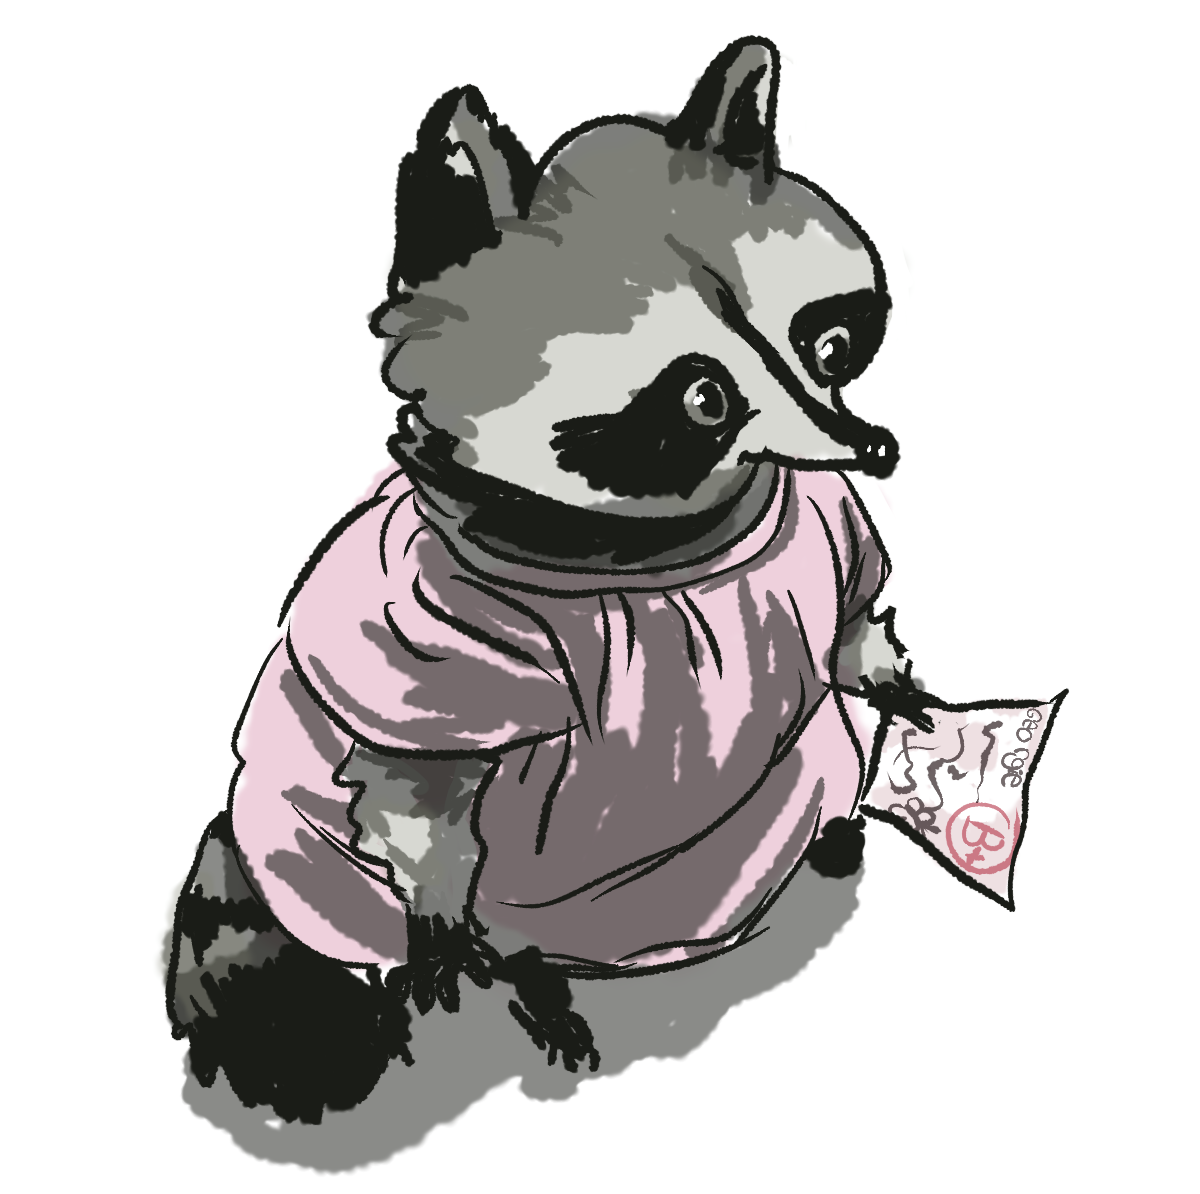 Digital drawing of a raccoon in a plain pink dress looking a little stressed holding a piece of paper that is a school assignment graded with a B+